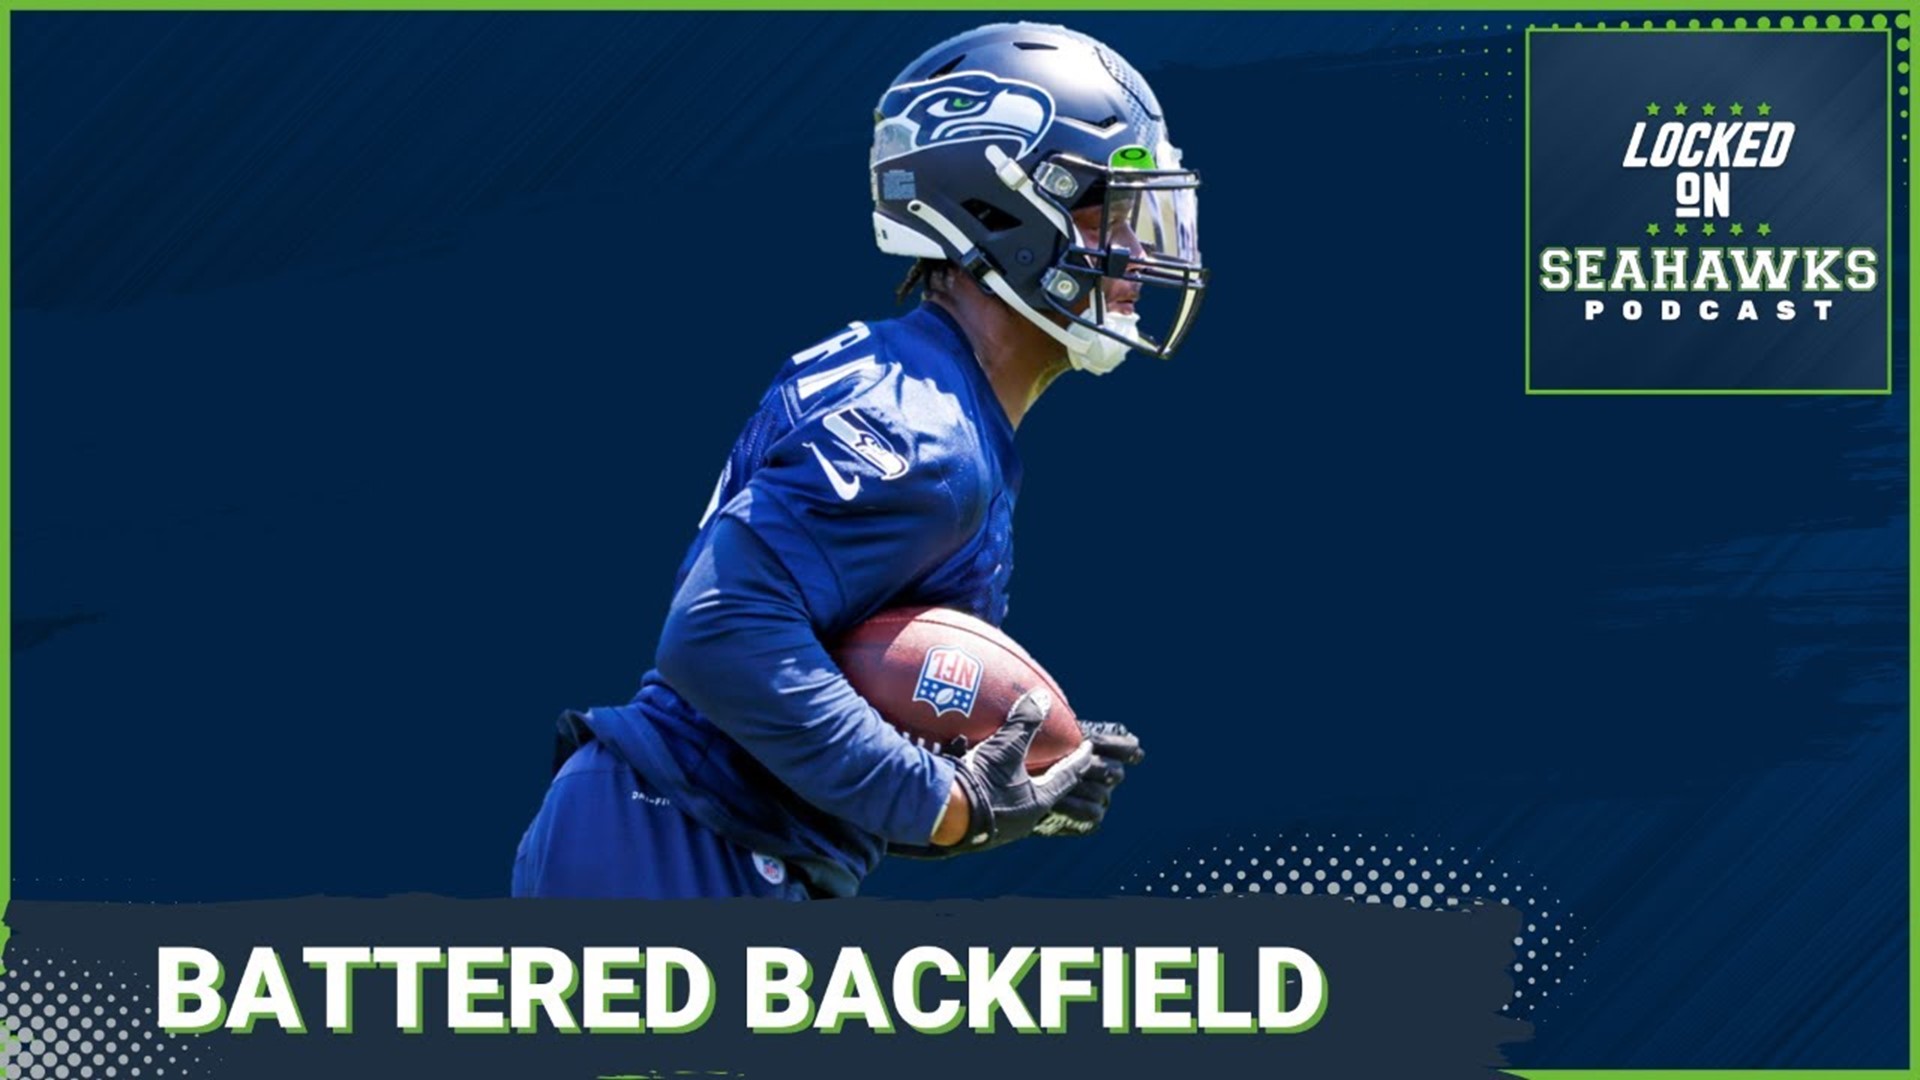 Less than a week after the start of training camp, the Seahawks already have injury issues in the backfield with Ken Walker III and Zach Charbonnet sidelined.